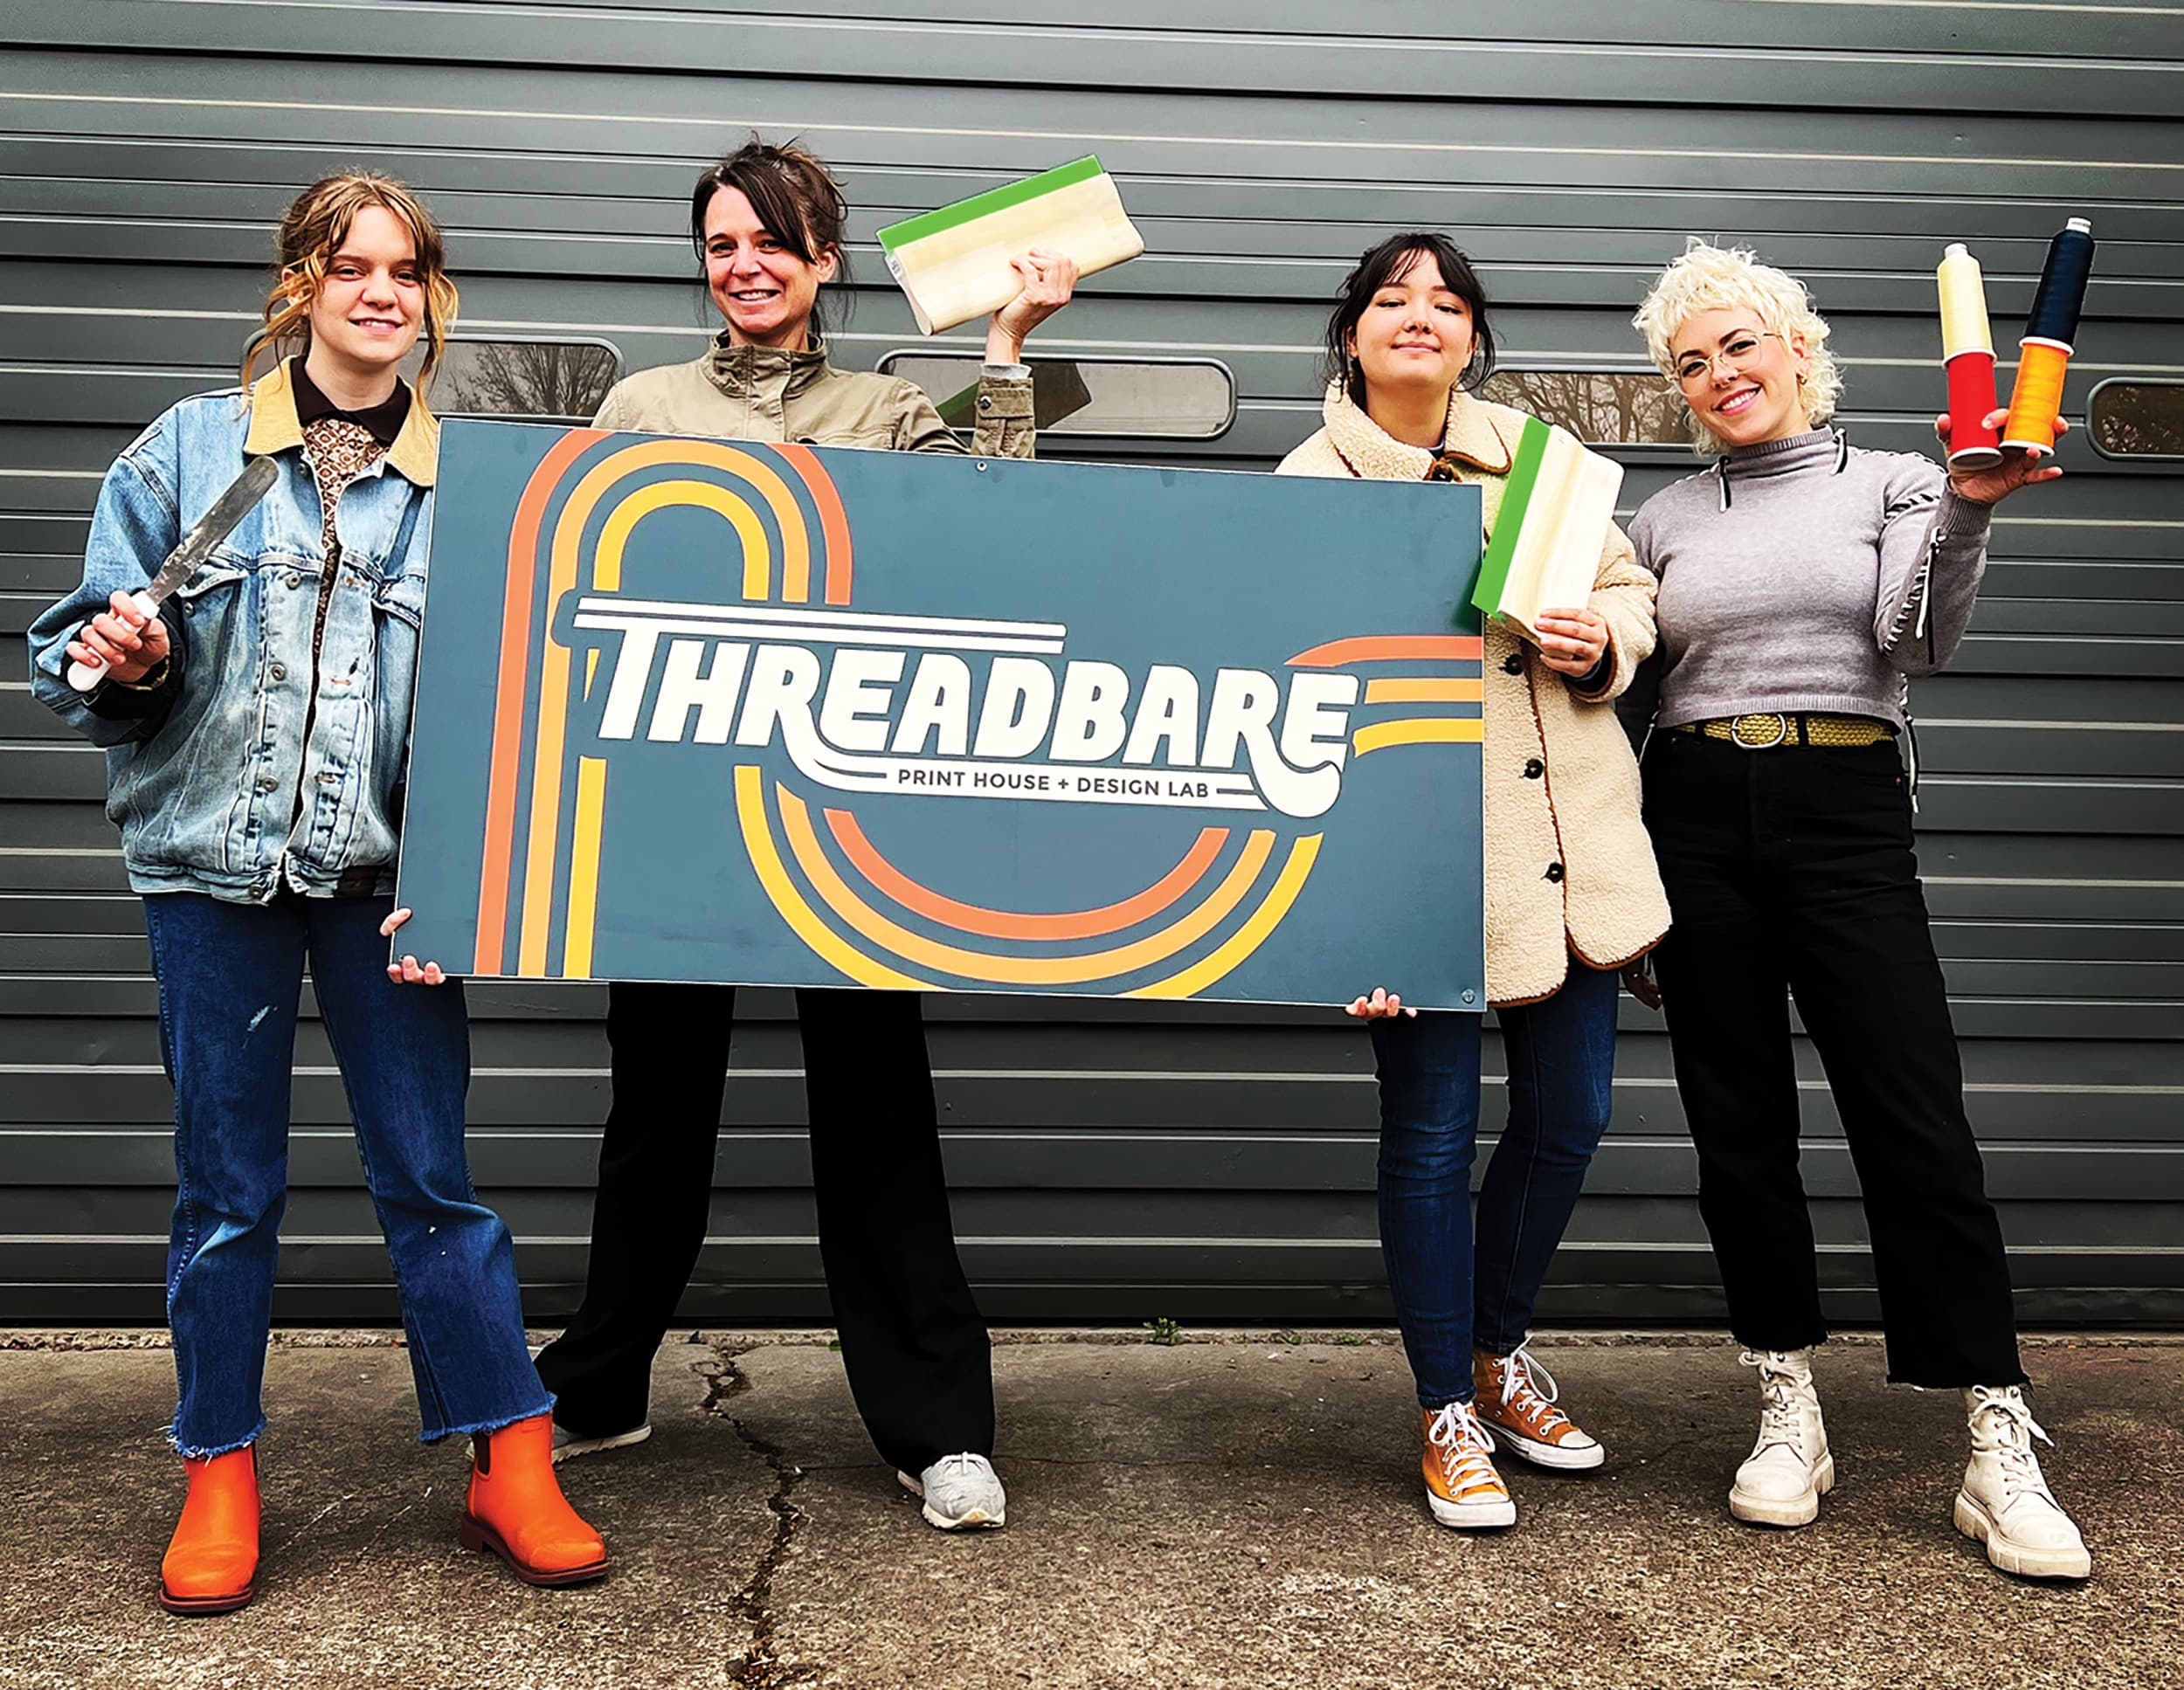  The Threadbare team “specializes in sustainability, creative designs, and super soft, breathable prints,” according to its website.